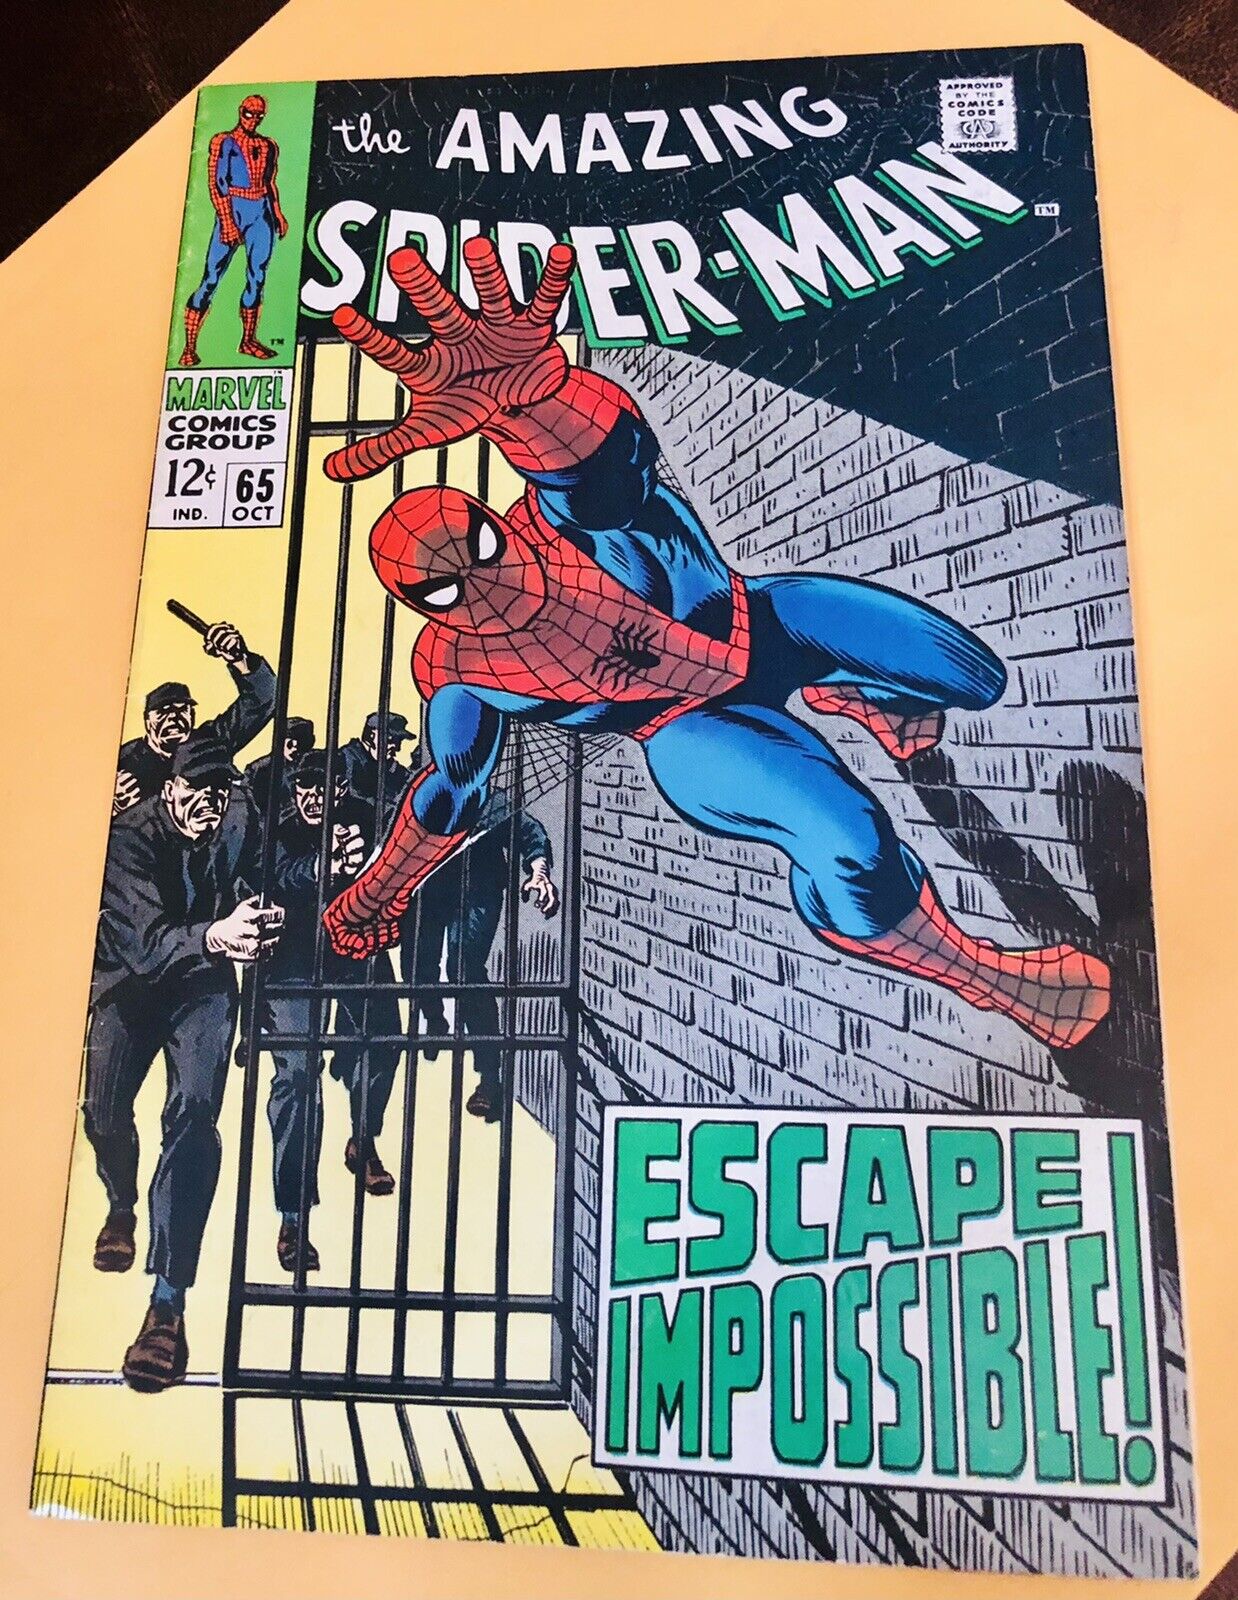 The Amazing Spider-Man #65 (Oct 1968, Marvel) “ESCAPE IMPOSSIBLE” Cleanest ORIG